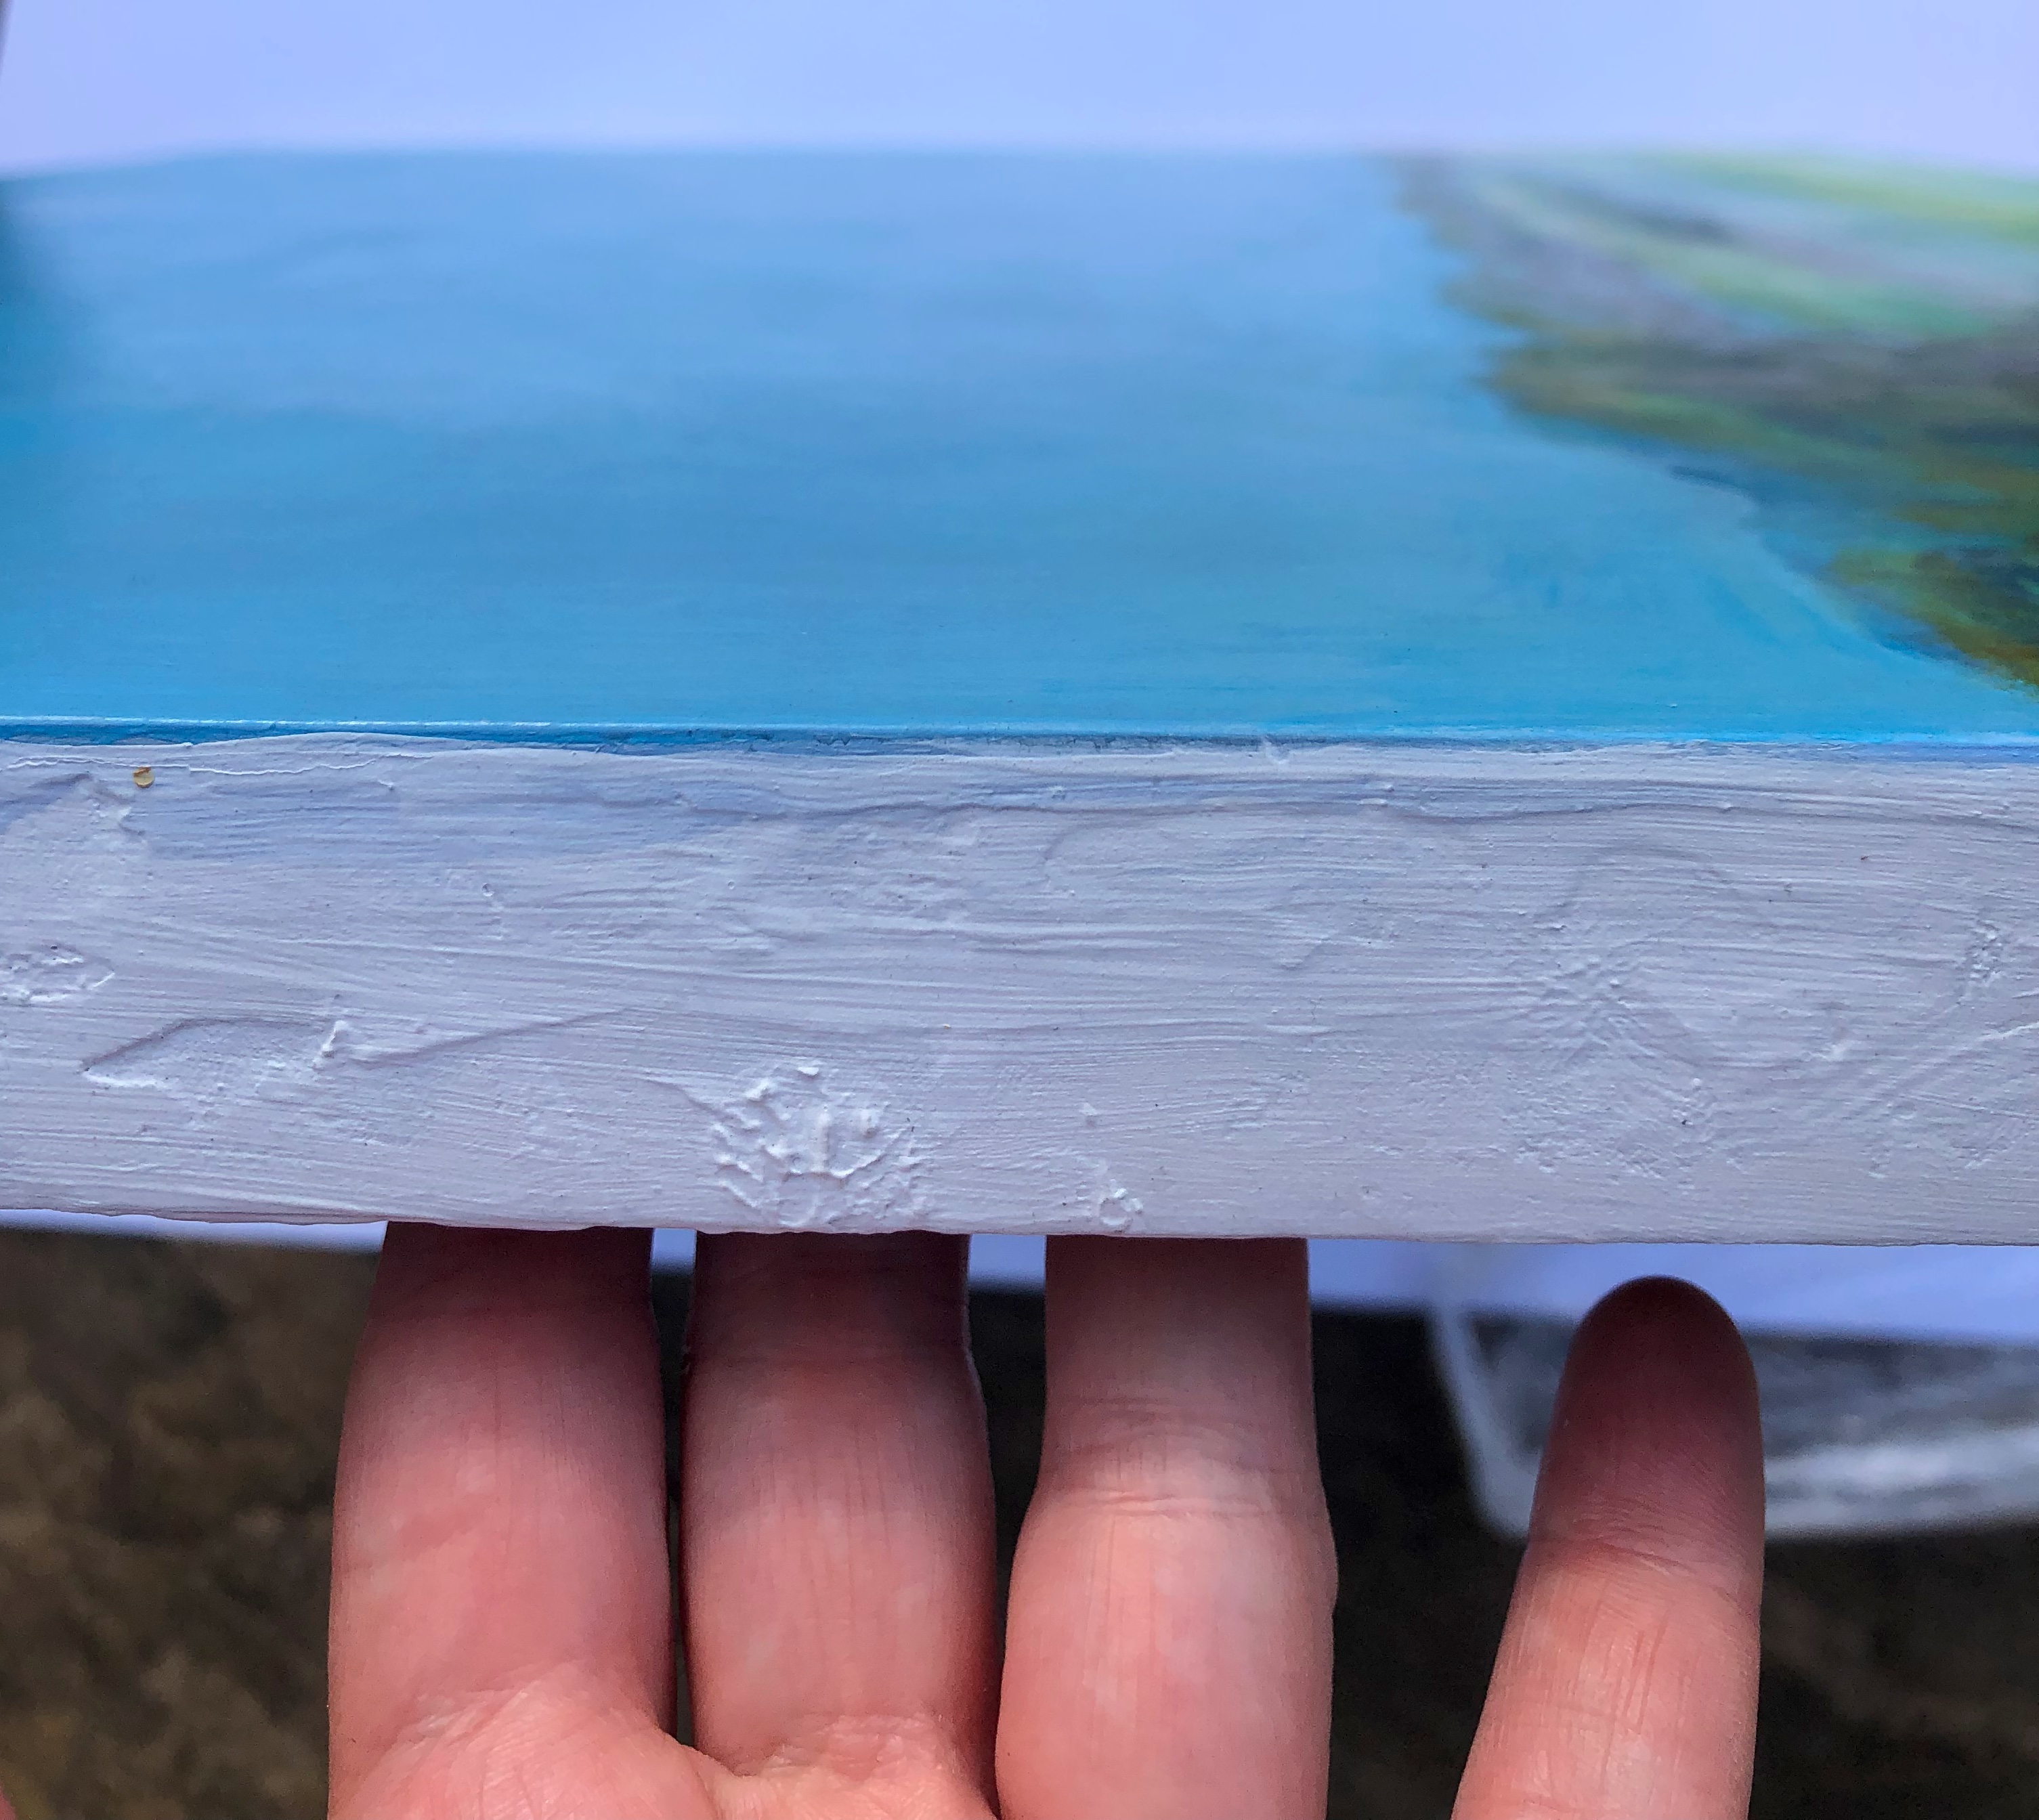 Edges of painting